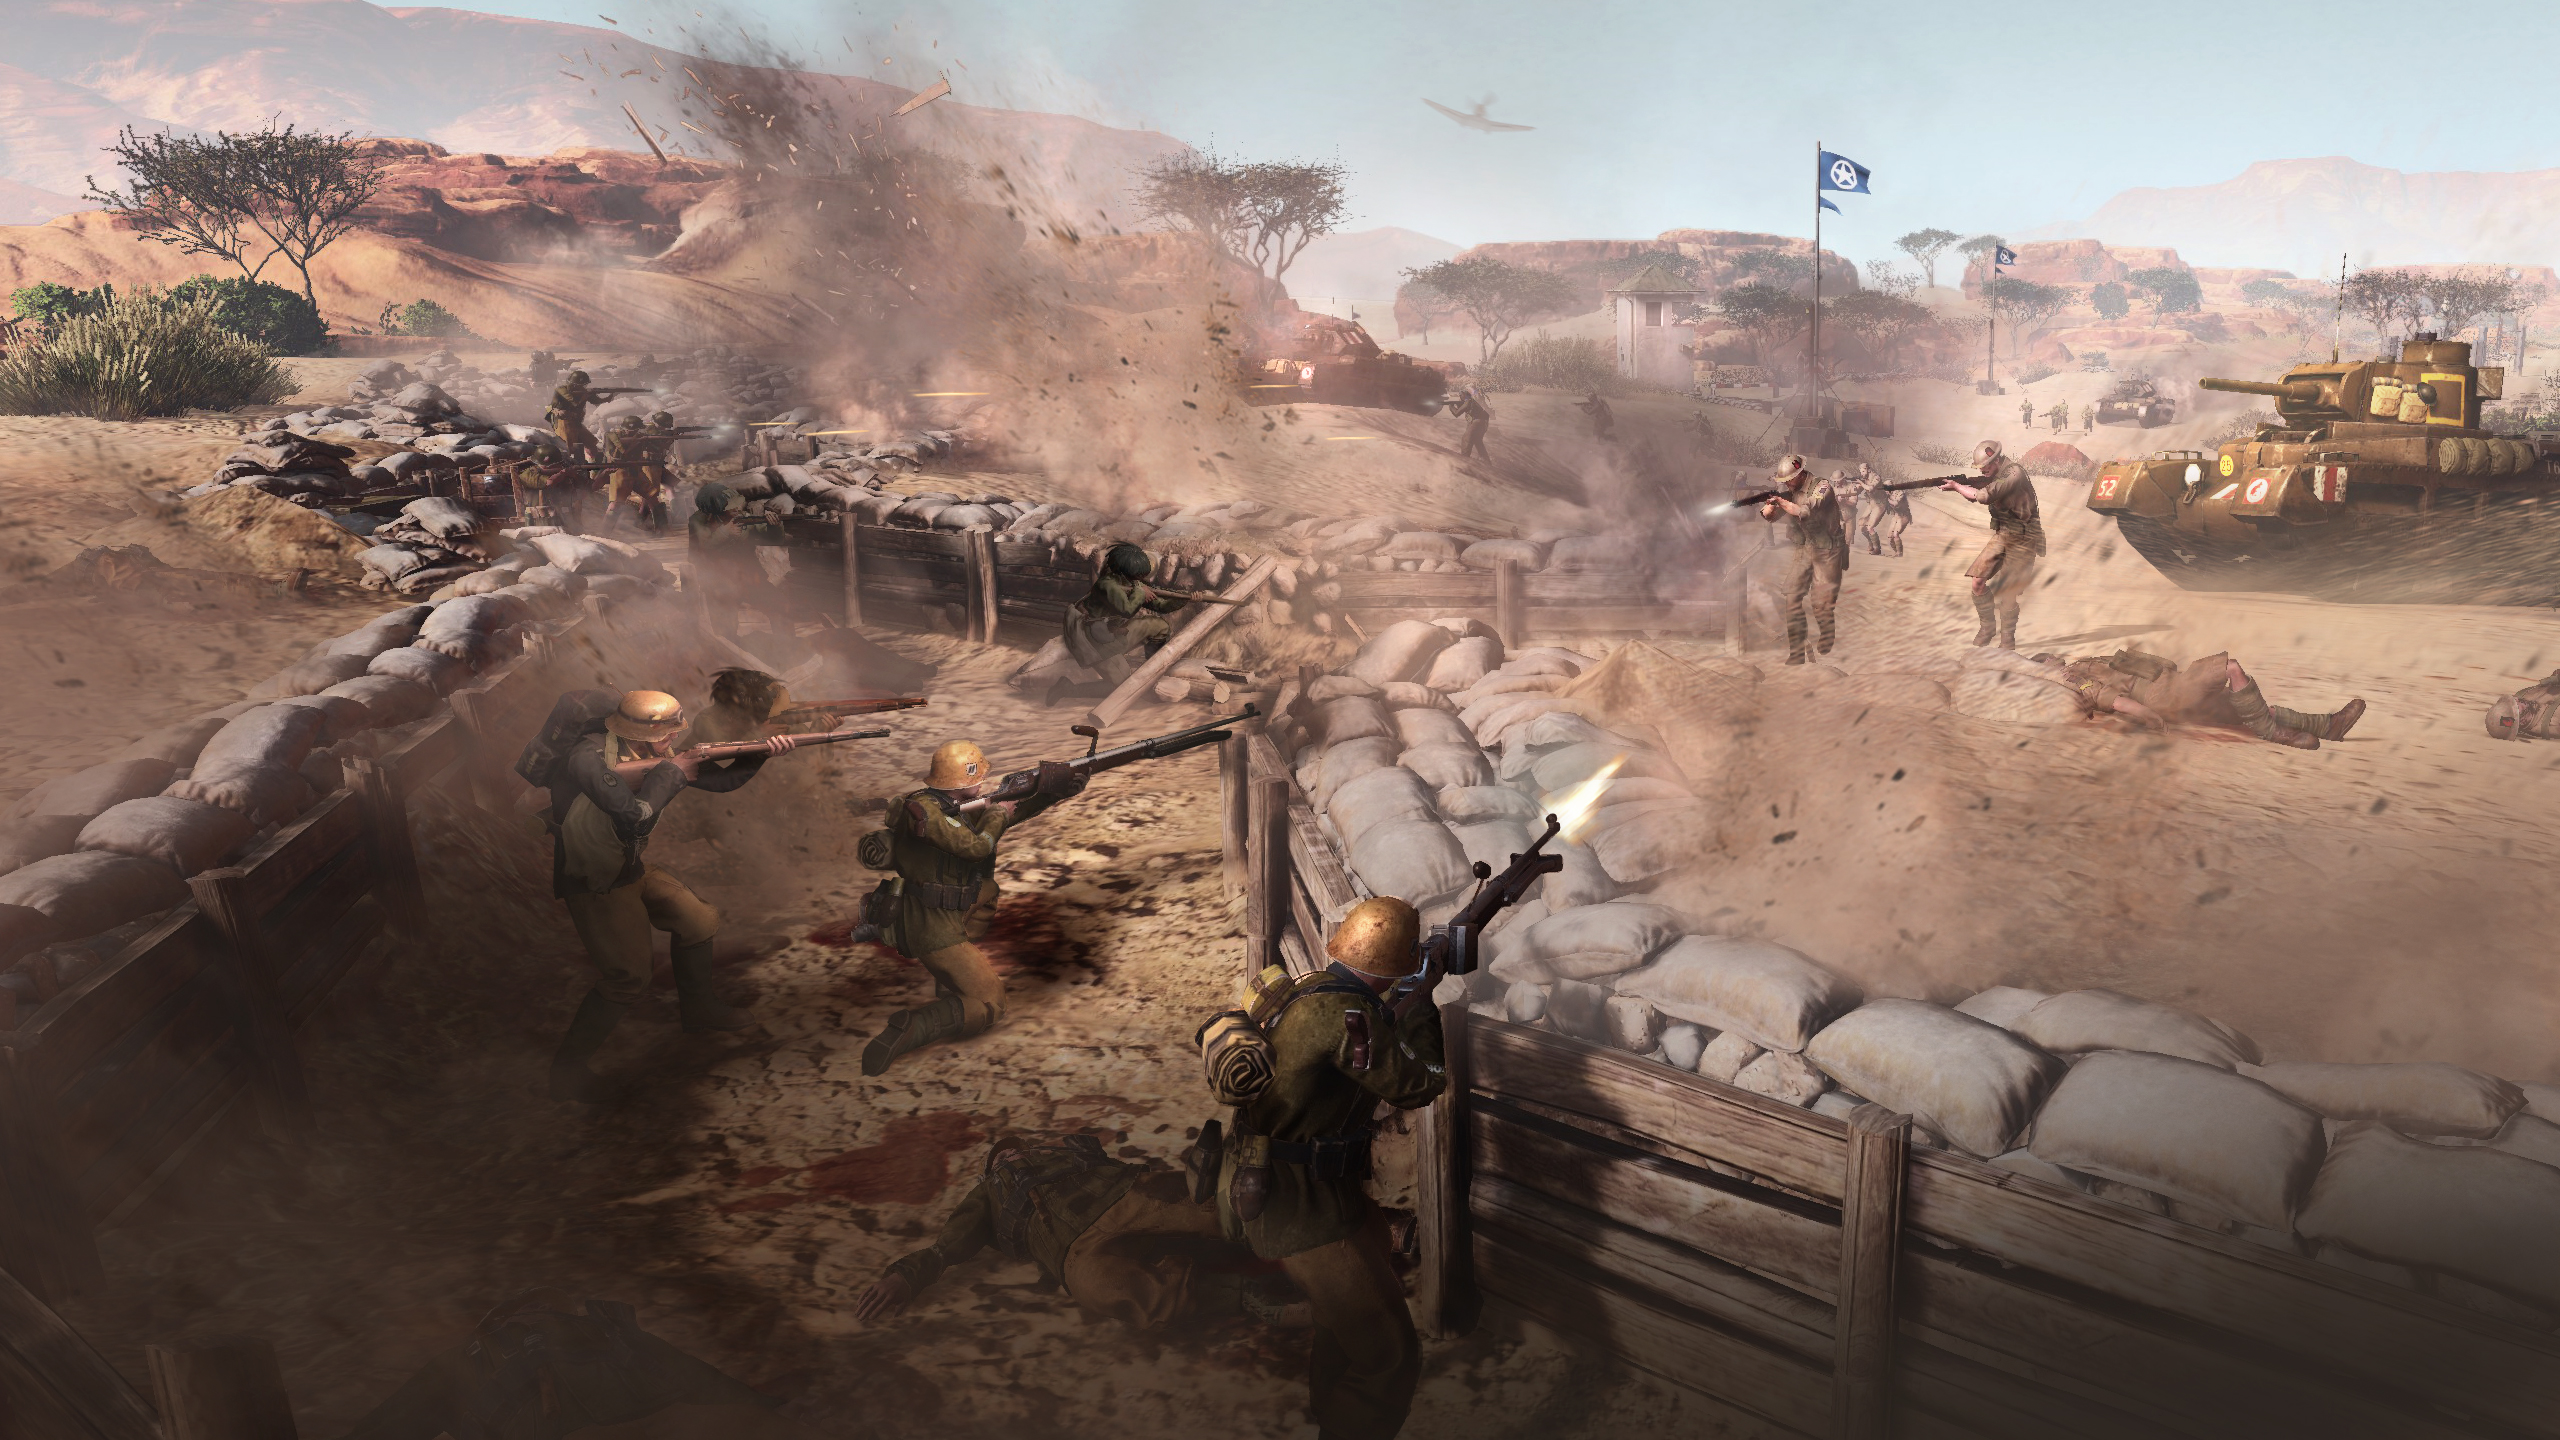 SEGA's Company Of Heroes 3 Introduces the Might of the “DEUTSCHES AFRIKAKORPS”